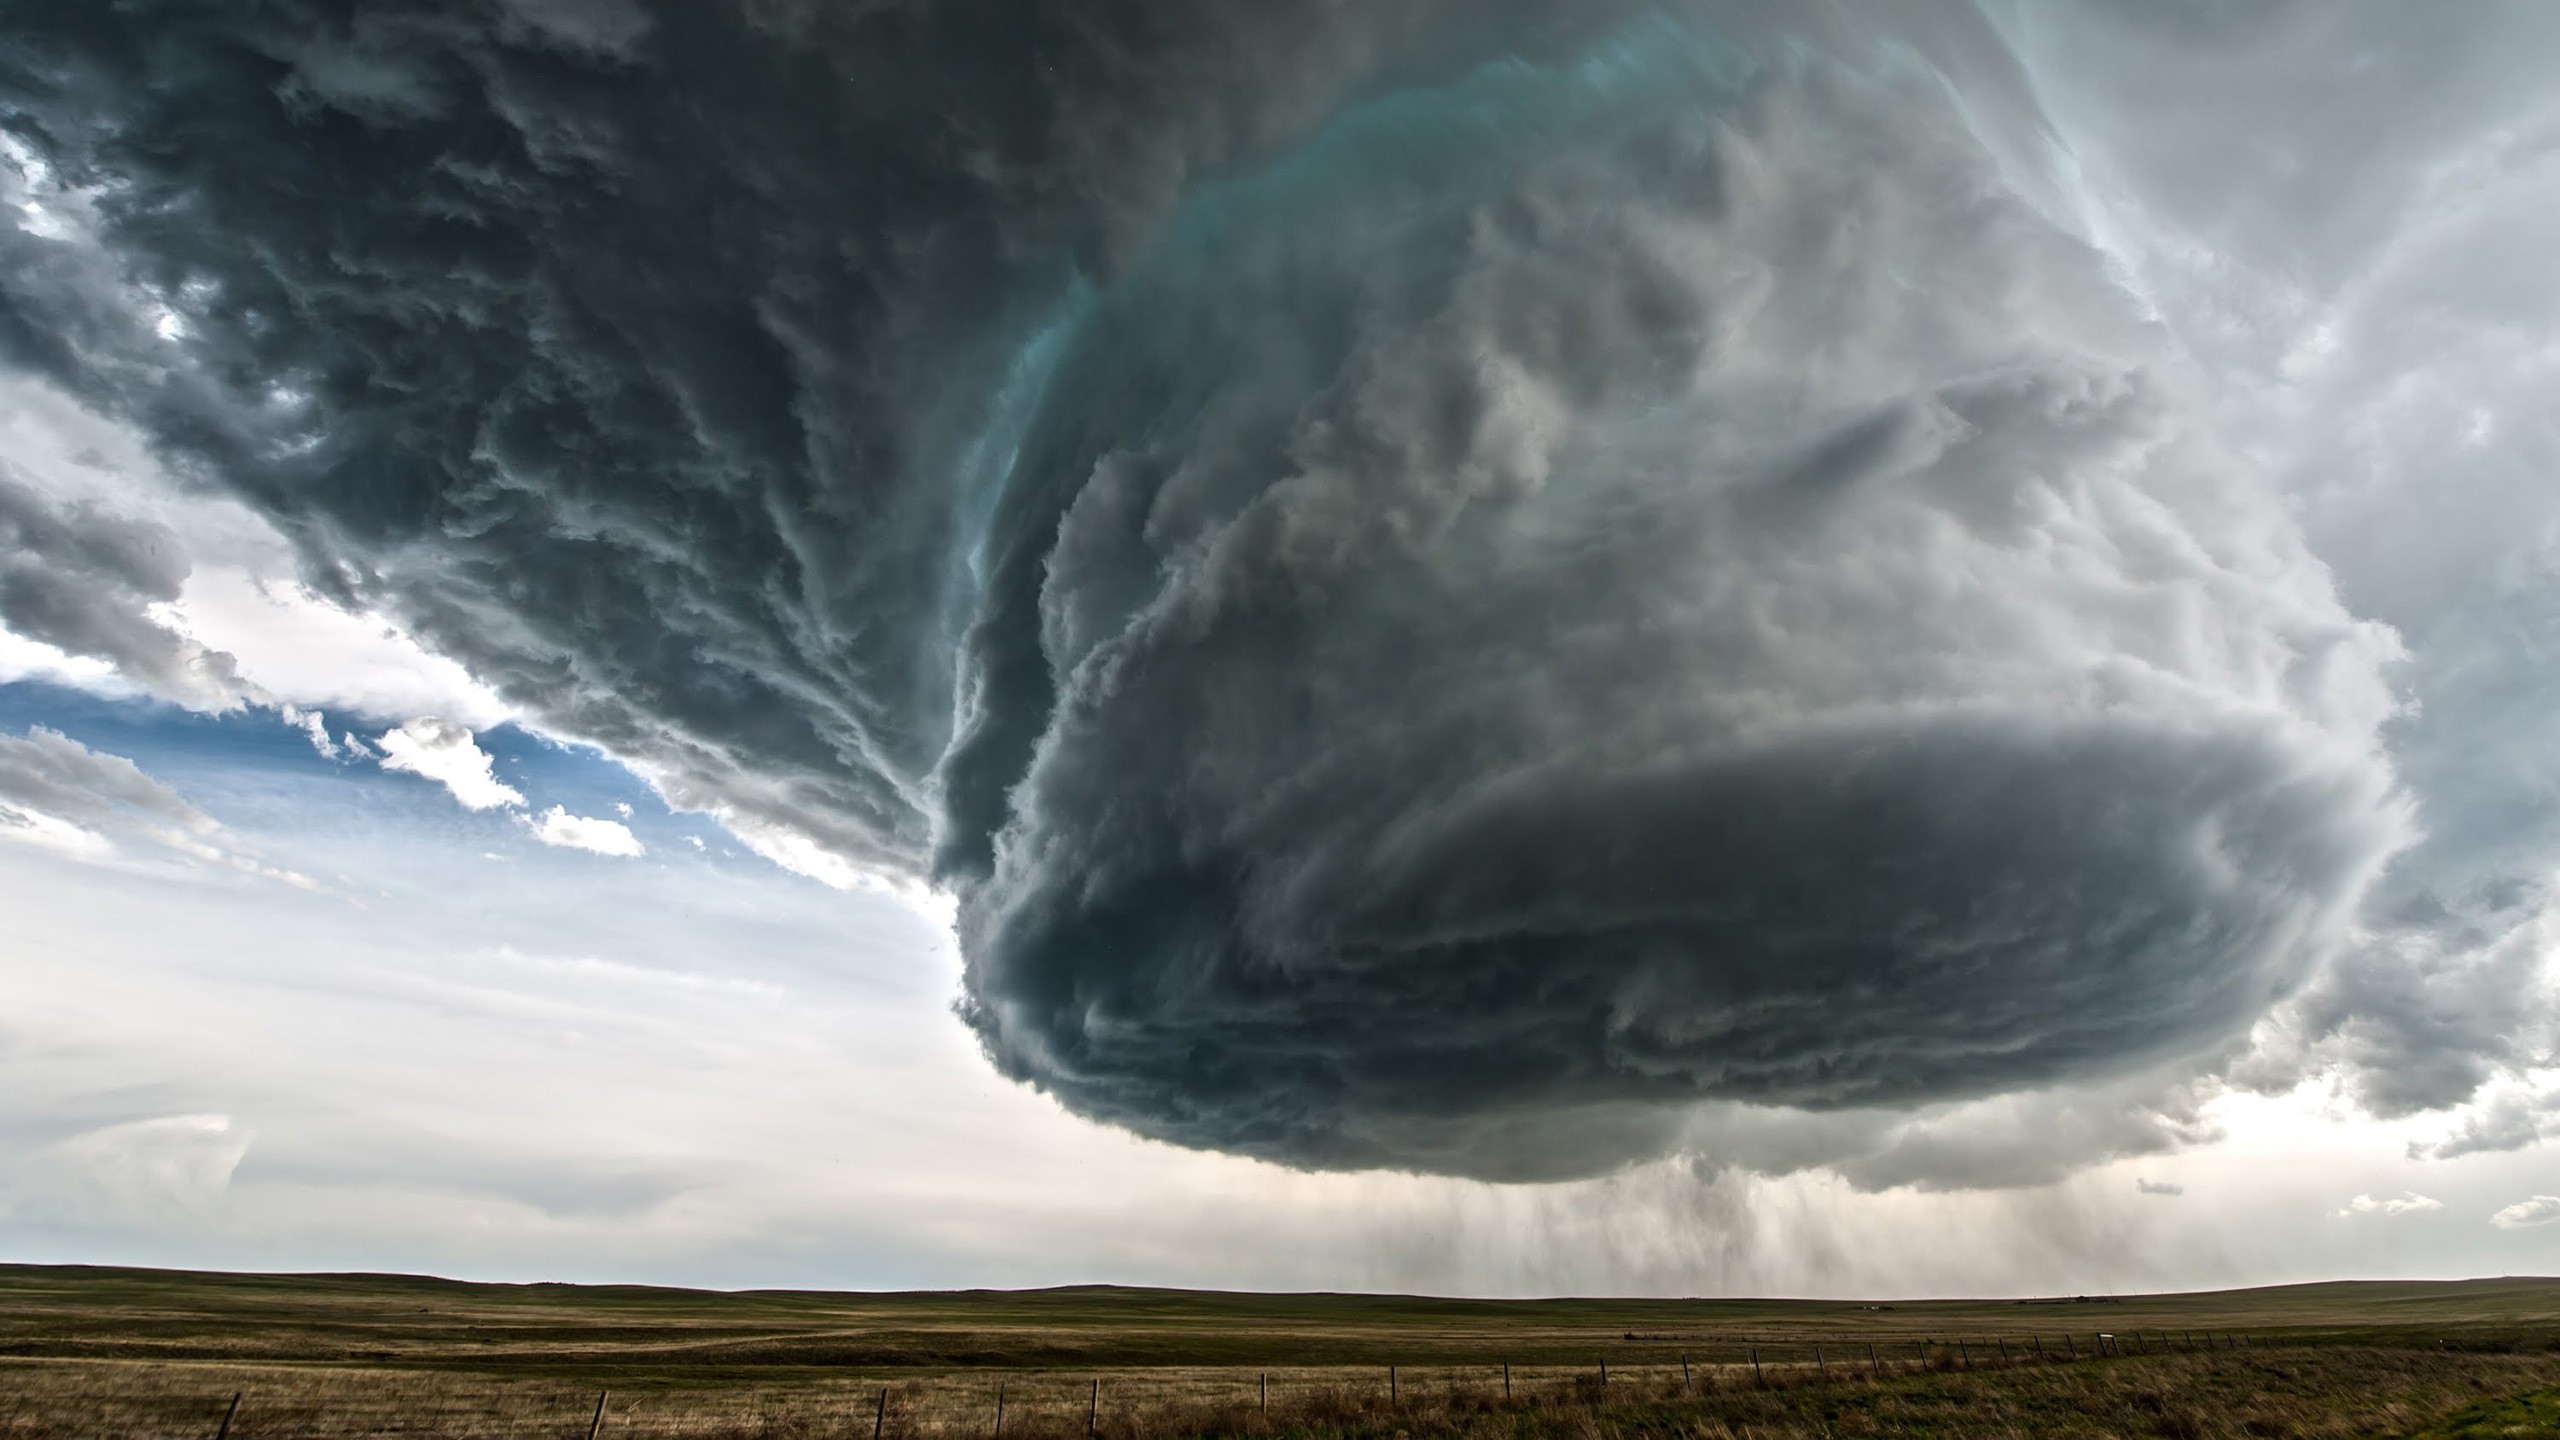 Nature Landscape Clouds Storm Wyoming USA Supercell Nature Rain Field Grass Fence 2560x1440